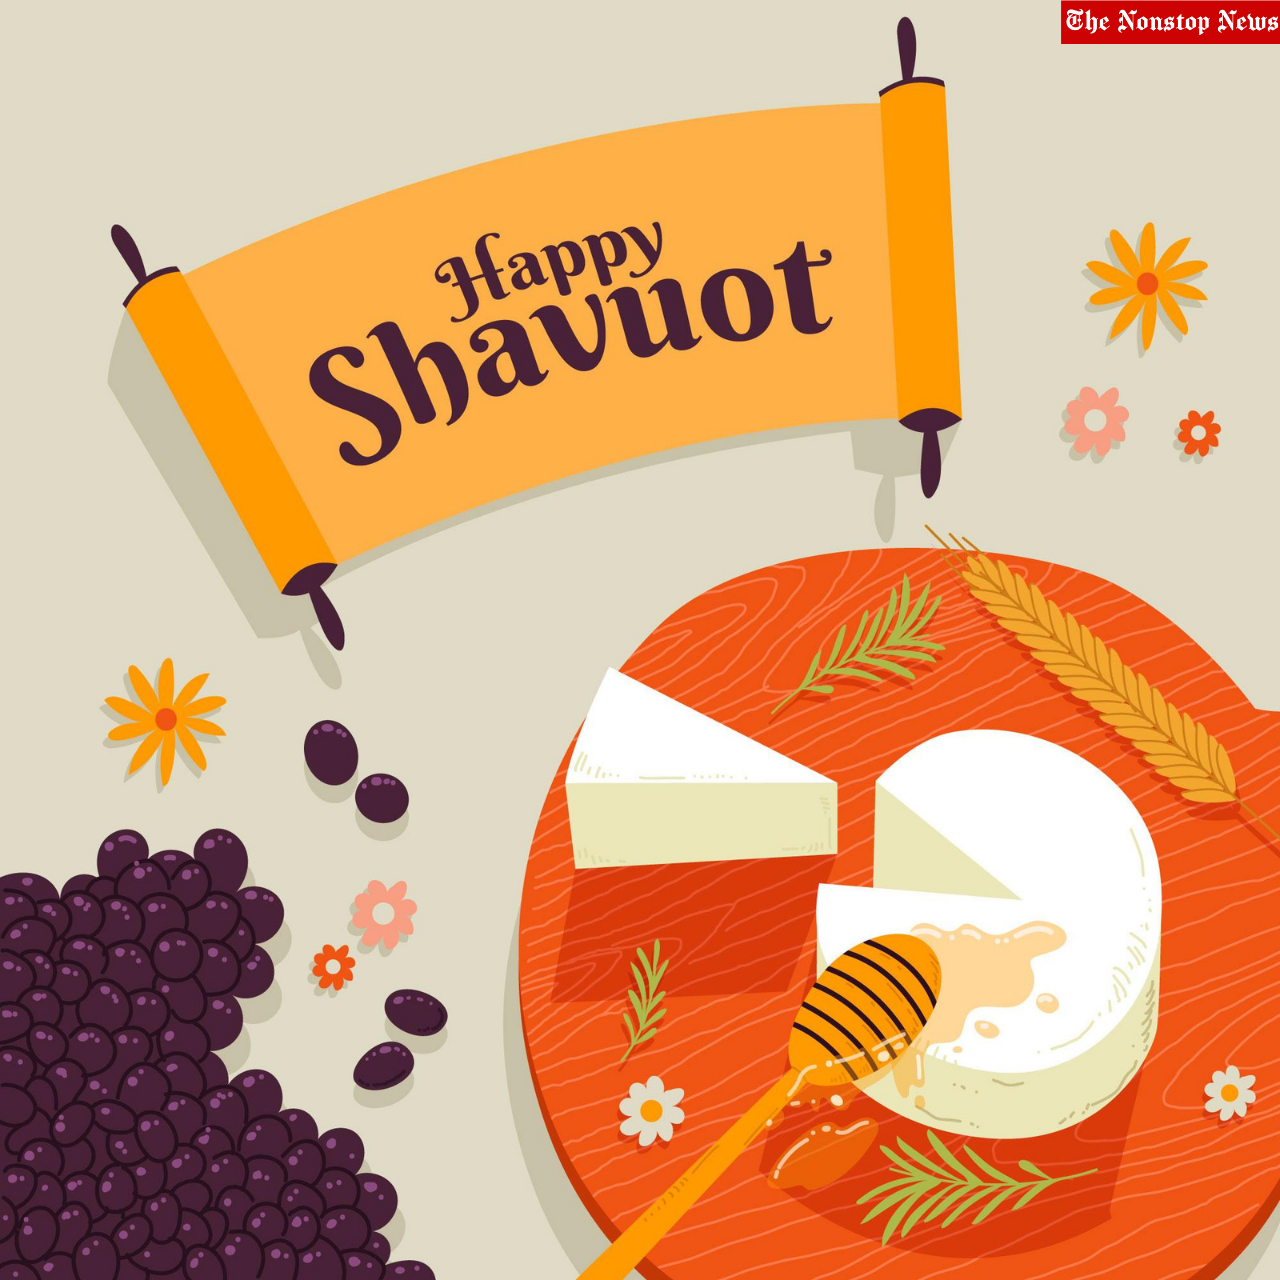 Happy Shavuot 2022: Best Wishes, Quotes, Images, Messages, Greetings, Posters, Sayings To Celebrate the 'Feast of Weeks'